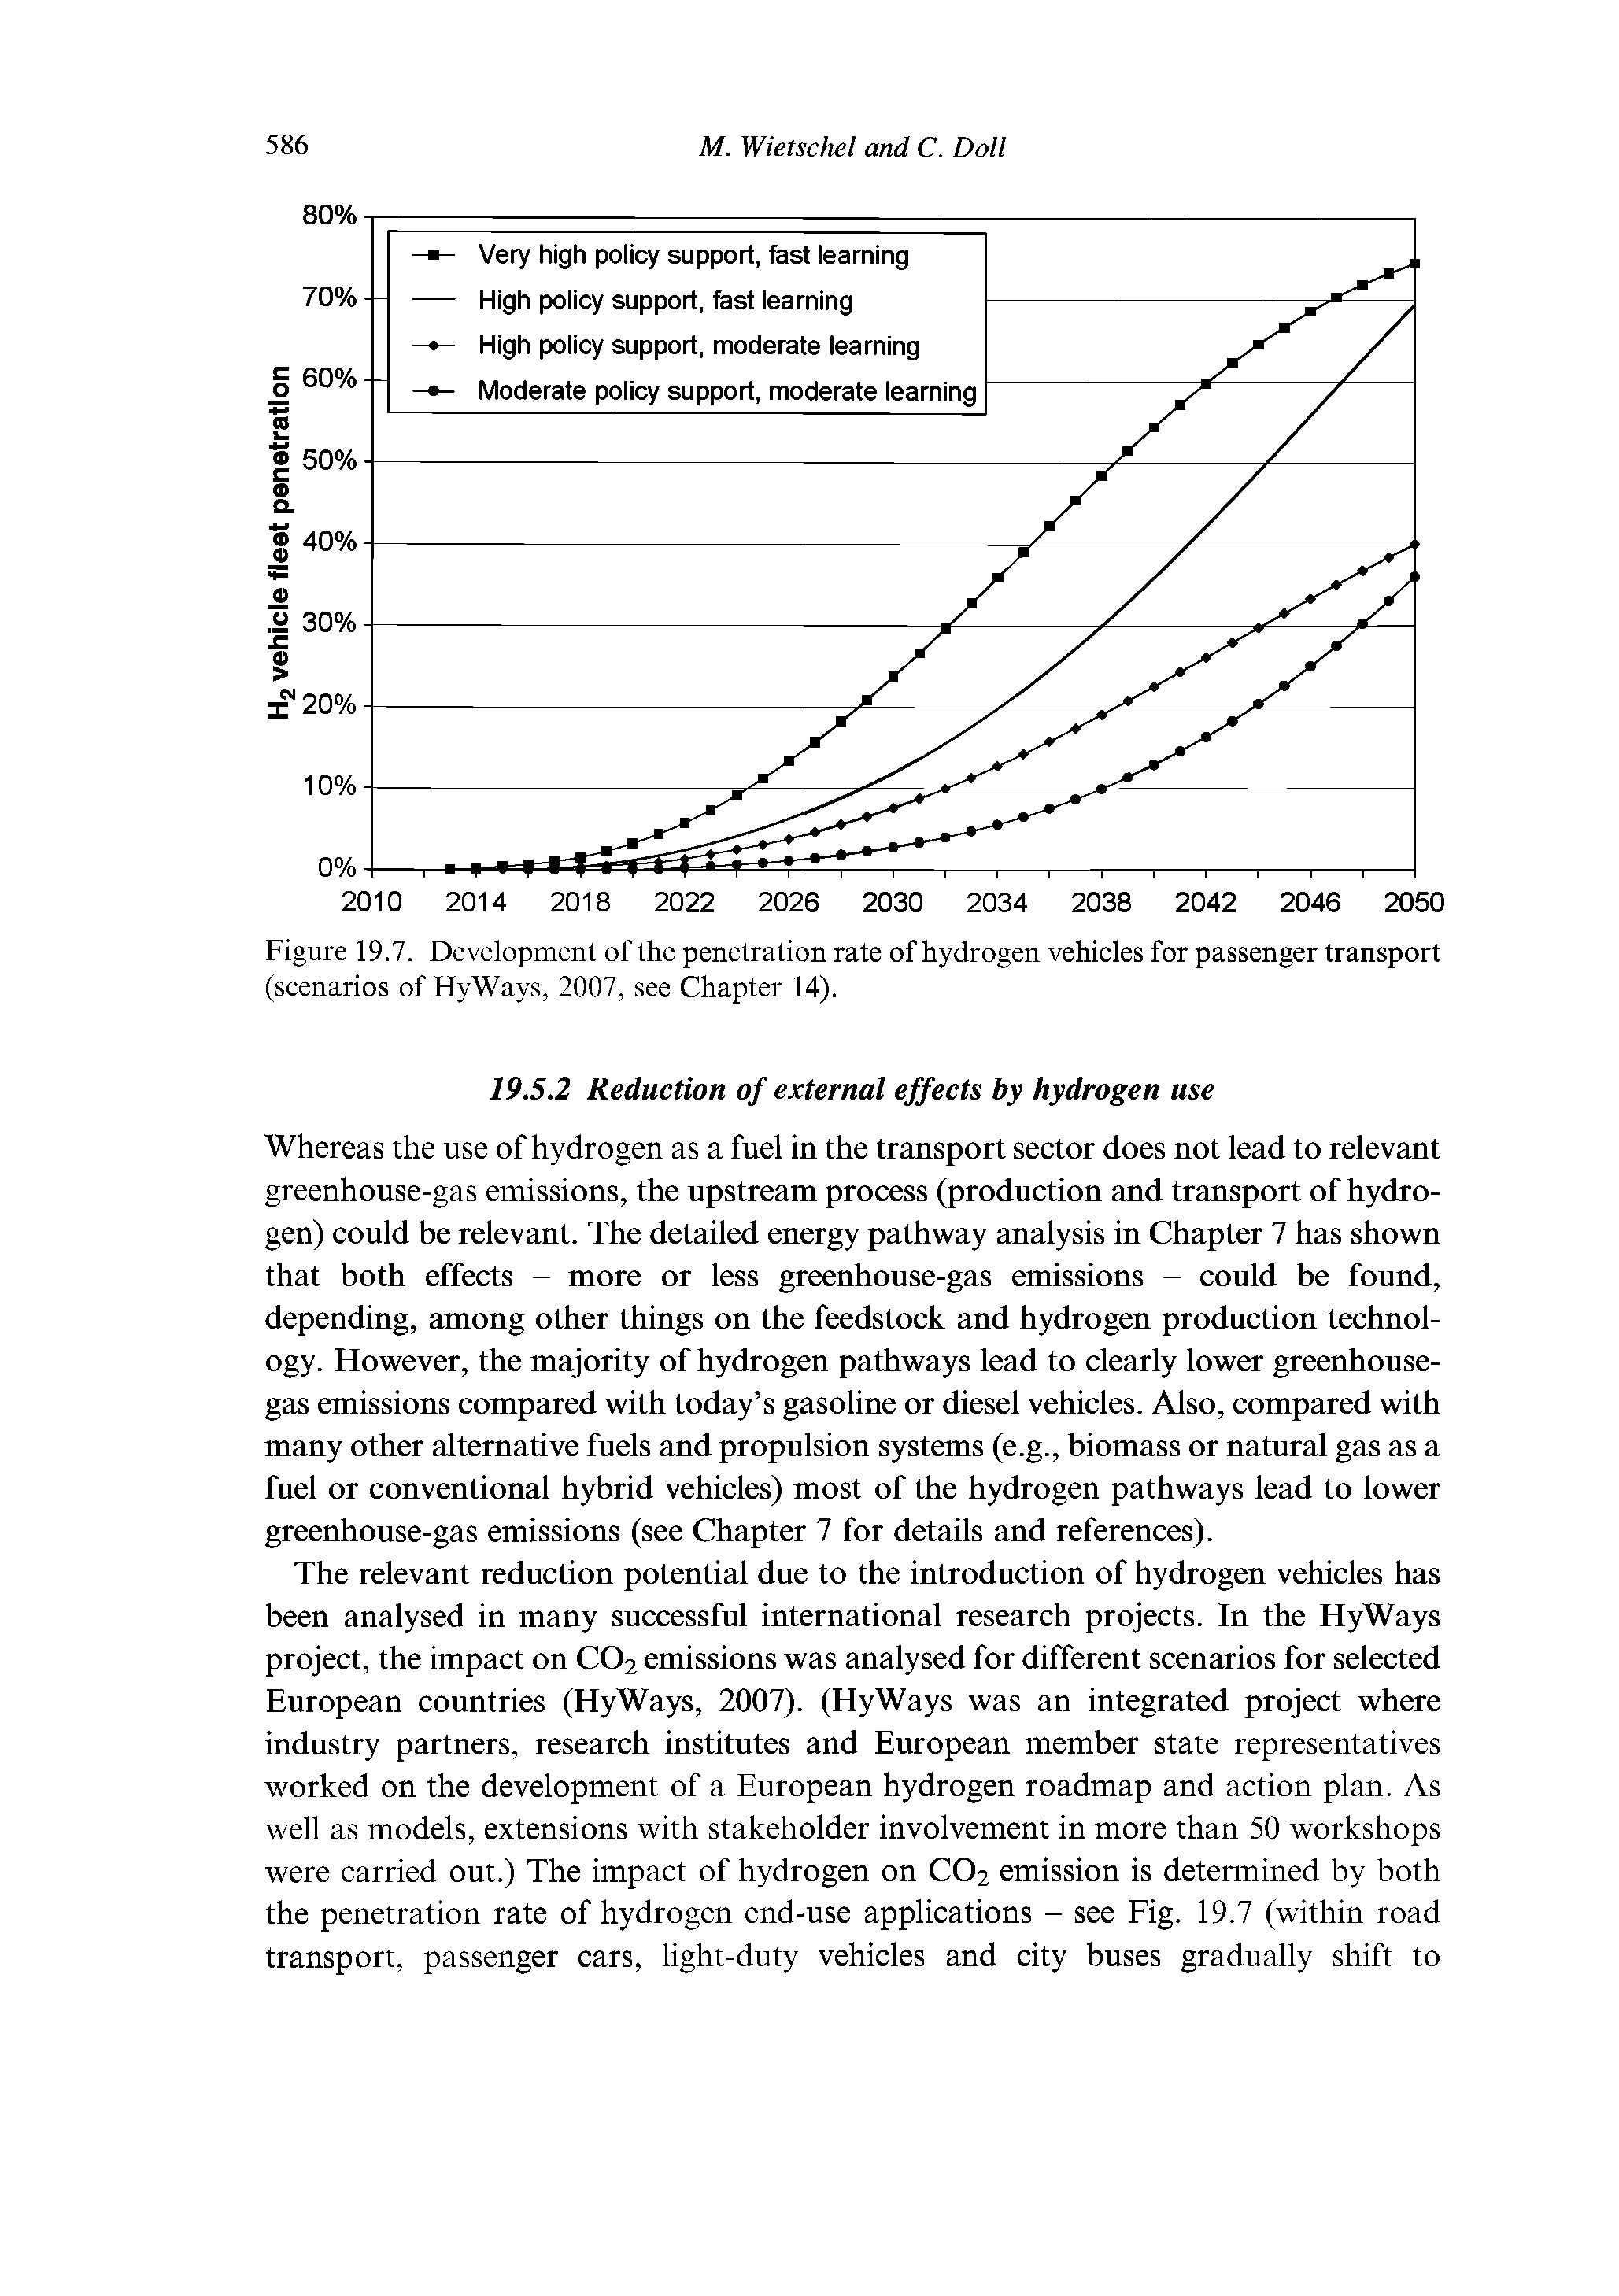 Figure 19.7. Development of the penetration rate of hydrogen vehicles for passenger transport (scenarios of HyWays, 2007, see Chapter 14).